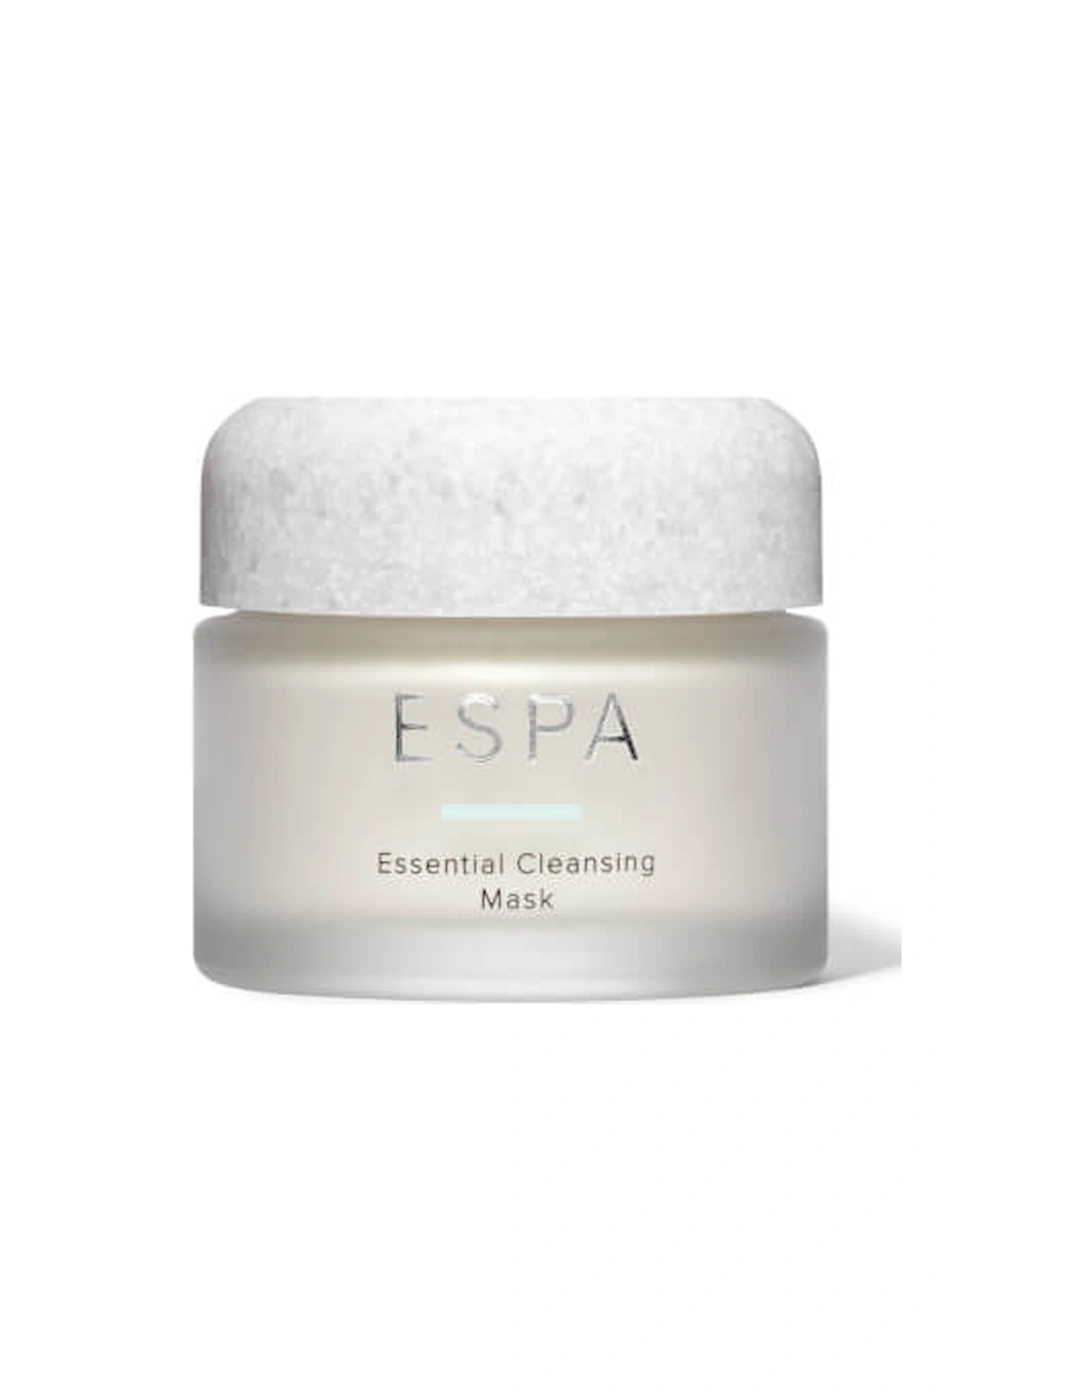 Essential Cleansing Mask 55ml - ESPA, 2 of 1